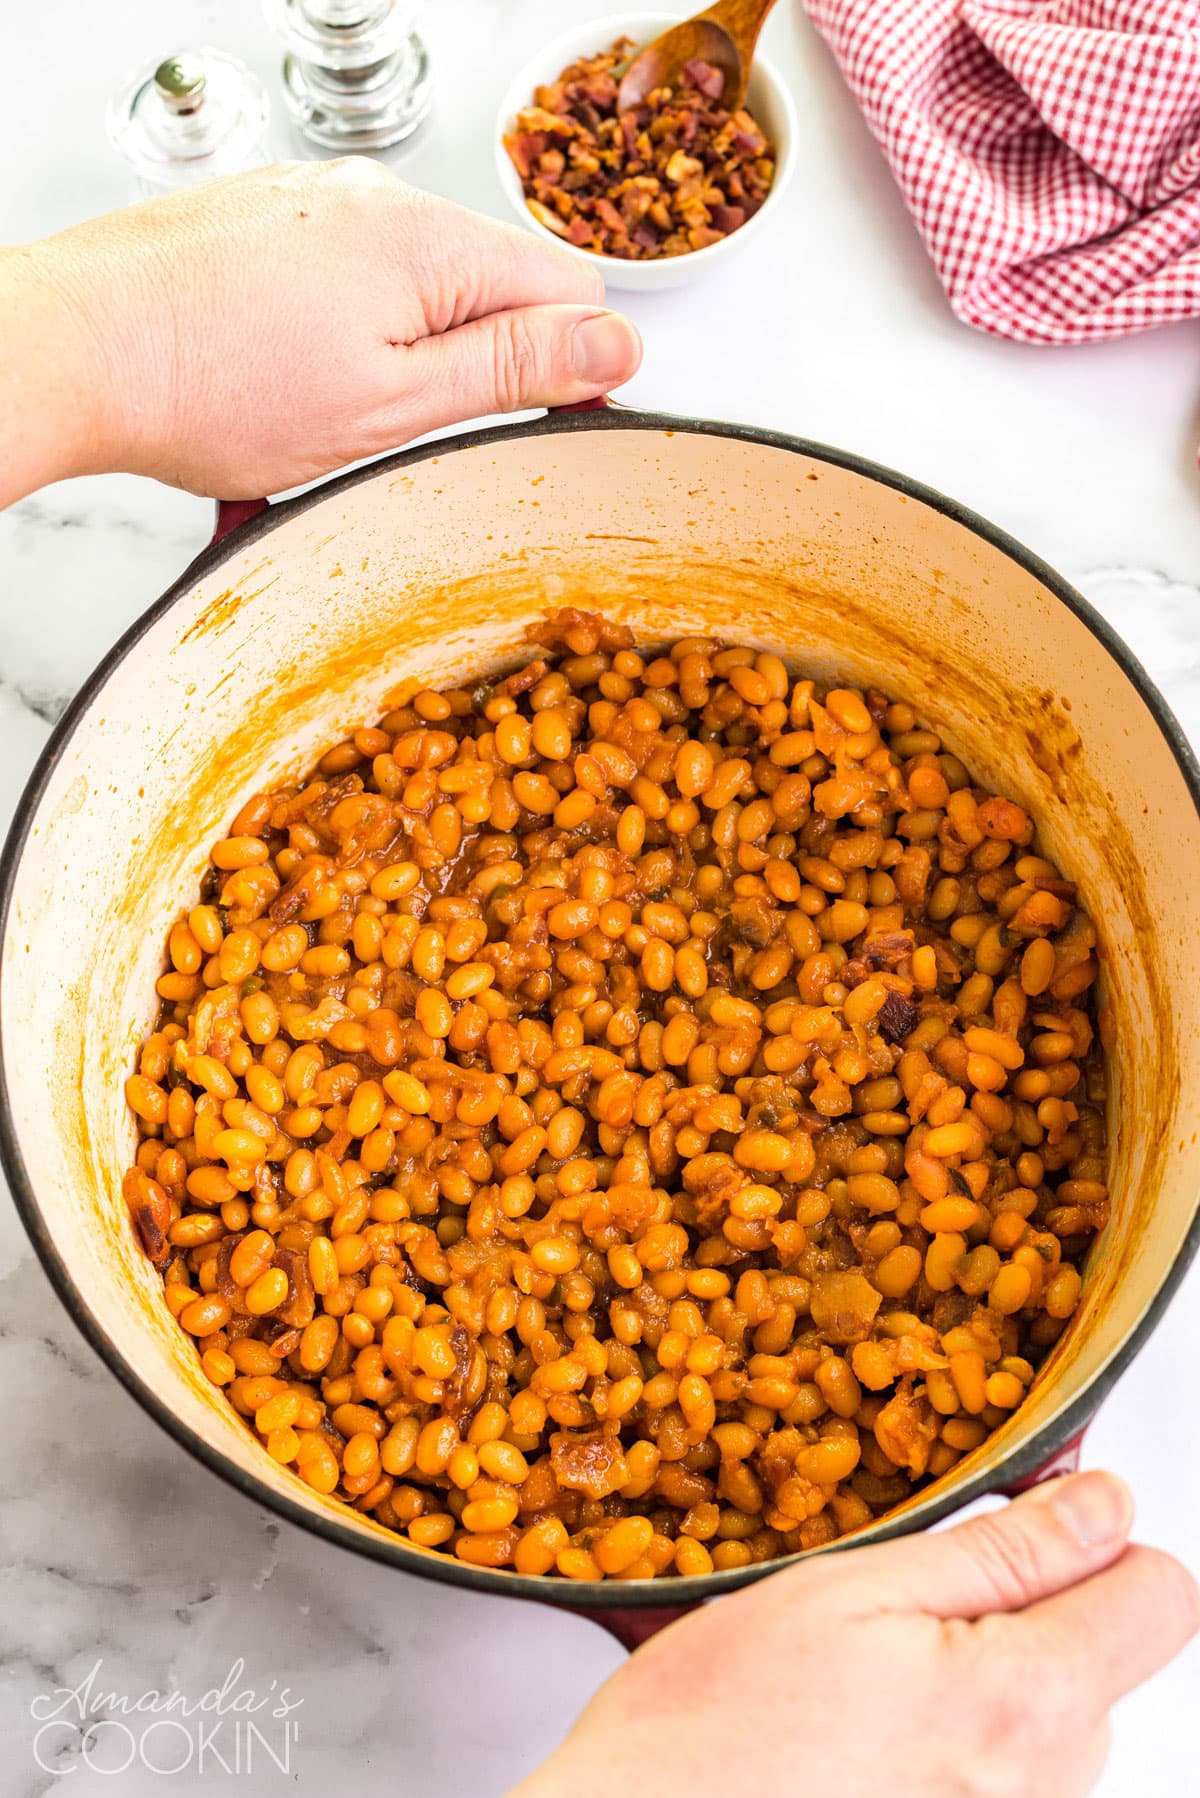 dutch oven full of homemade baked beans being carried to the table